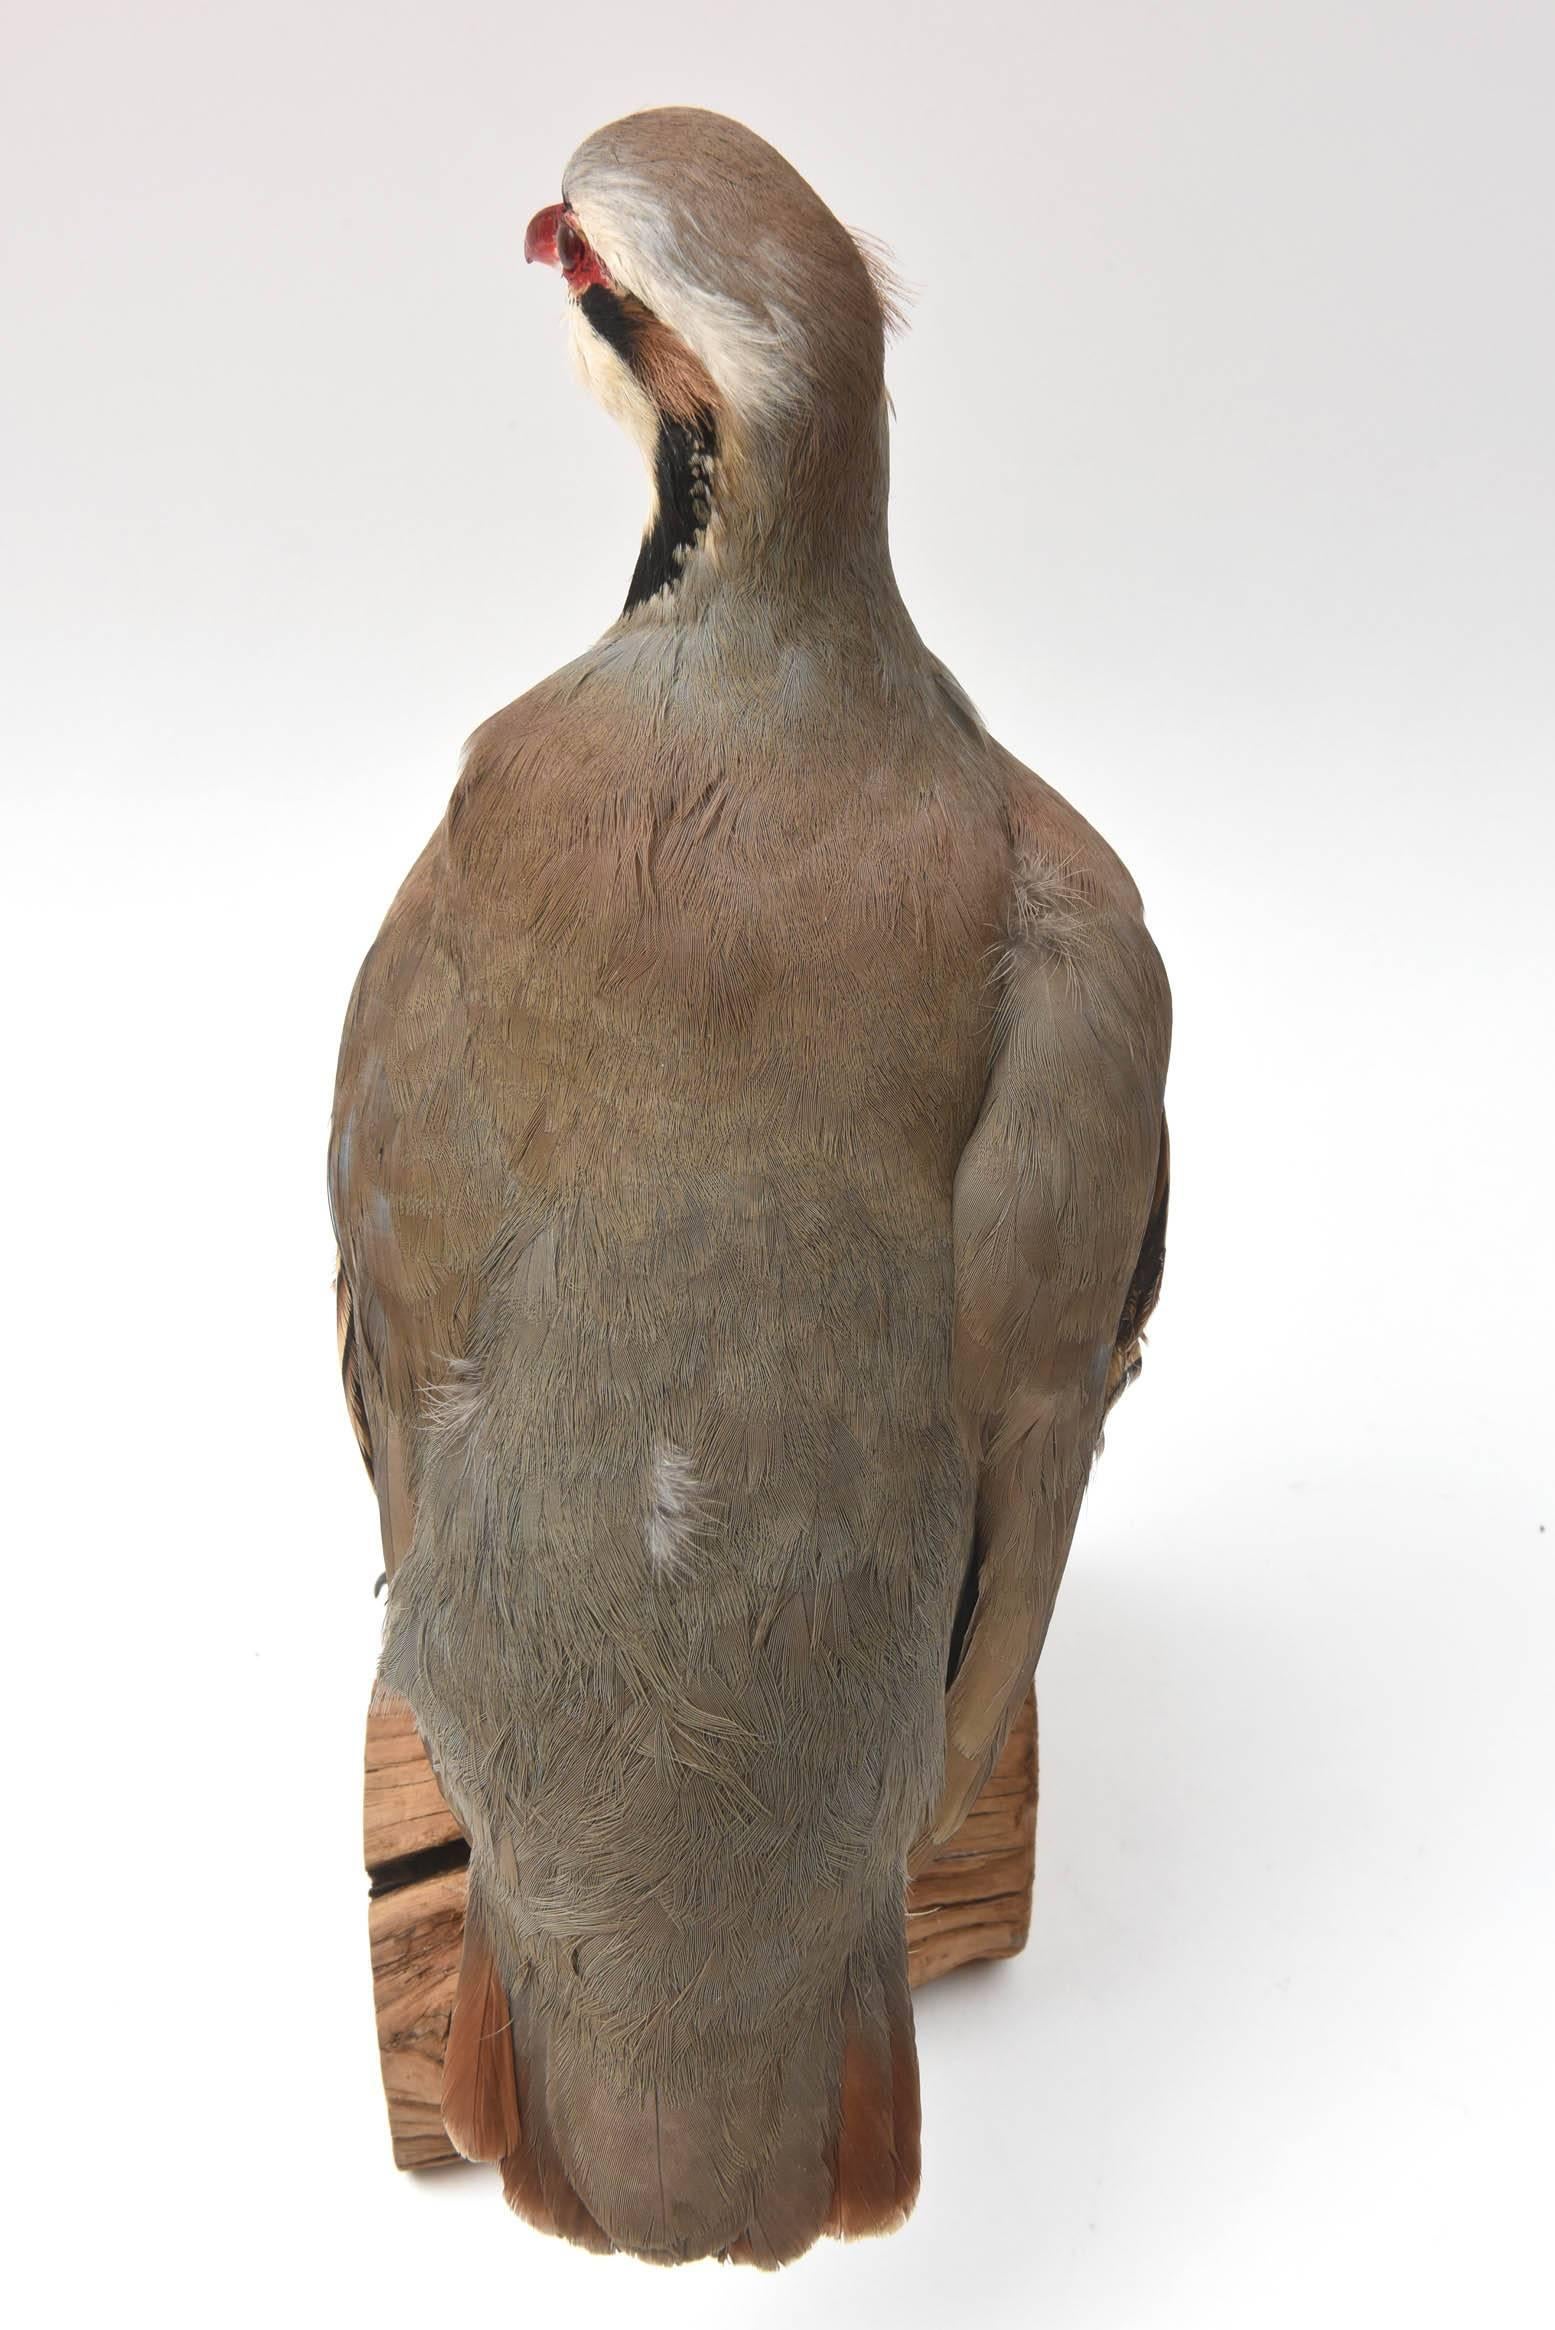 Partridge Taxidermy, Newer with Great Coloring 2